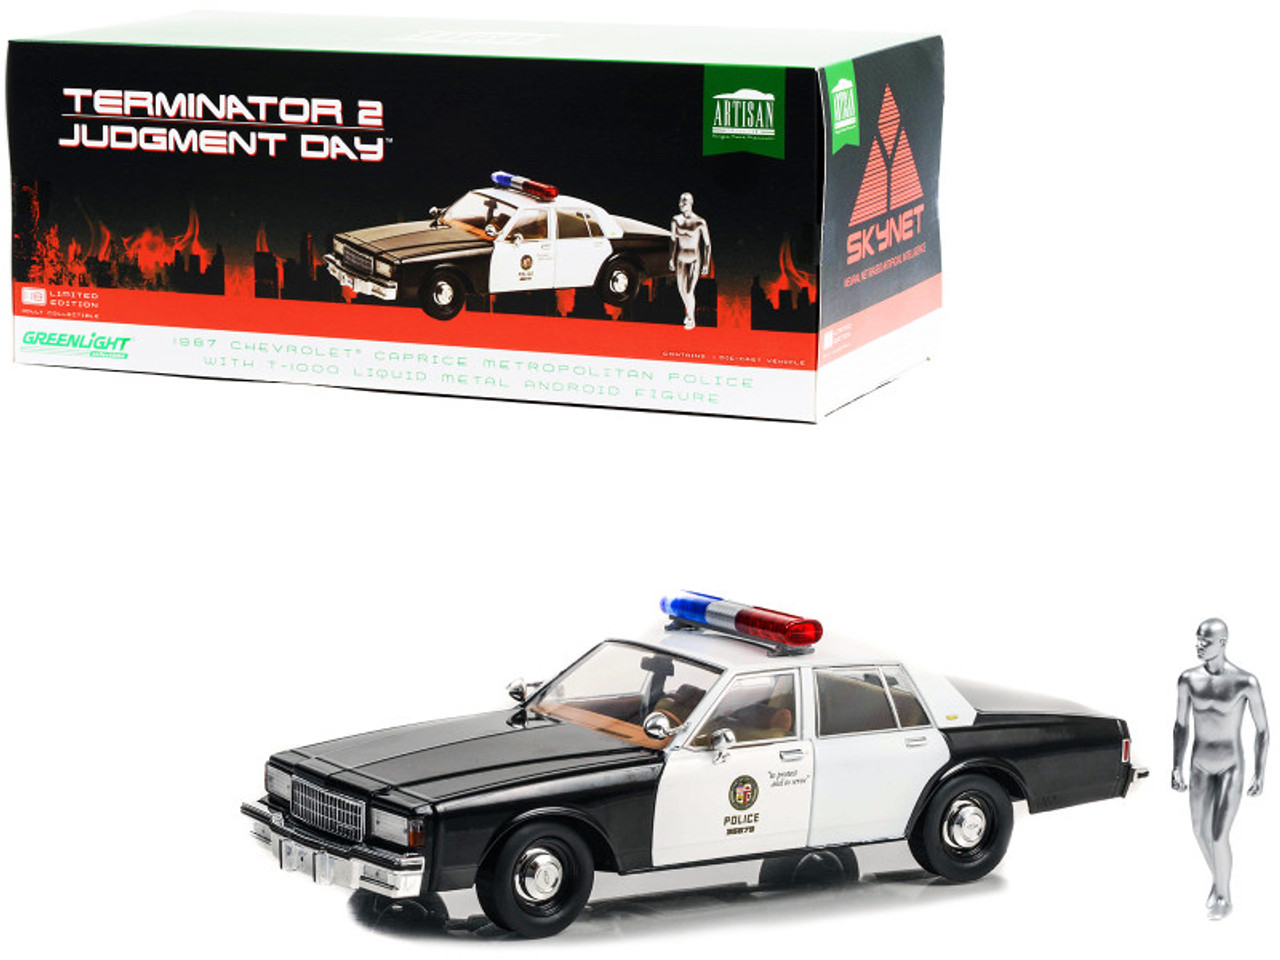 1/18 Greenlight 1987 Chevrolet Caprice Metropolitan Police Black and White with T-1000 Liquid Metal Android Diecast Figure "Terminator 2: Judgment Day" (1991) Movie "Artisan Collection" Diecast Car Model